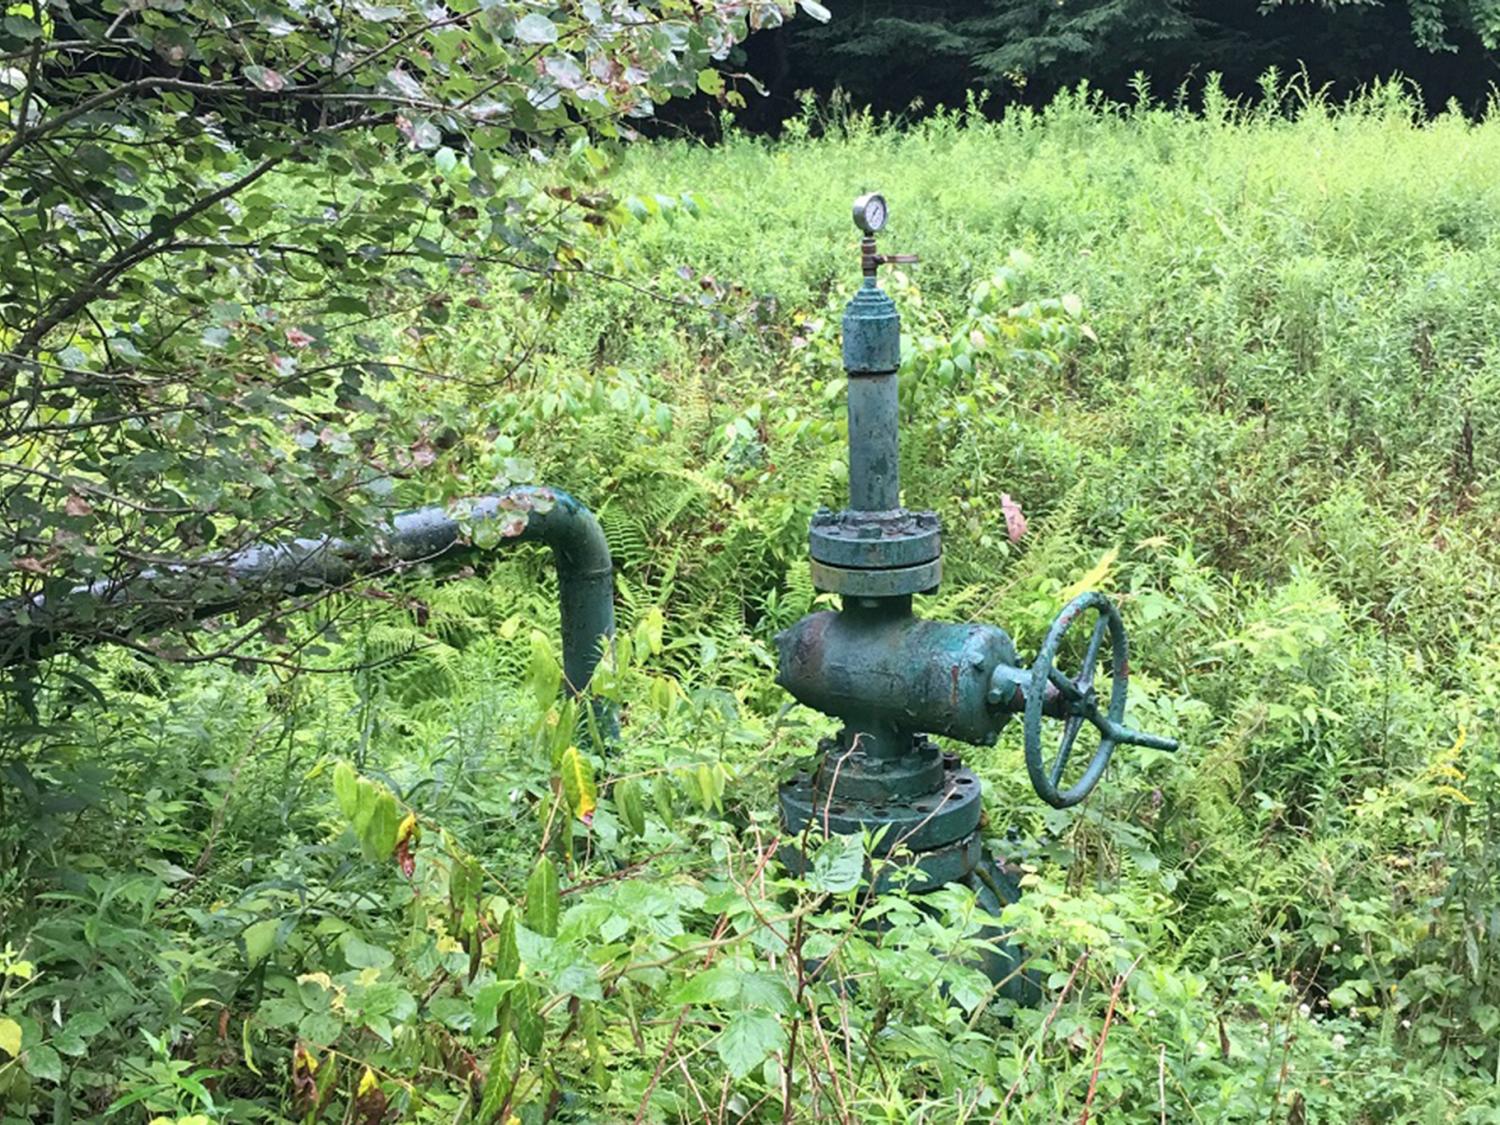 A sealed gas well in Moshannon State Forest Credit: Pennsylvania Department of Environmental Protection